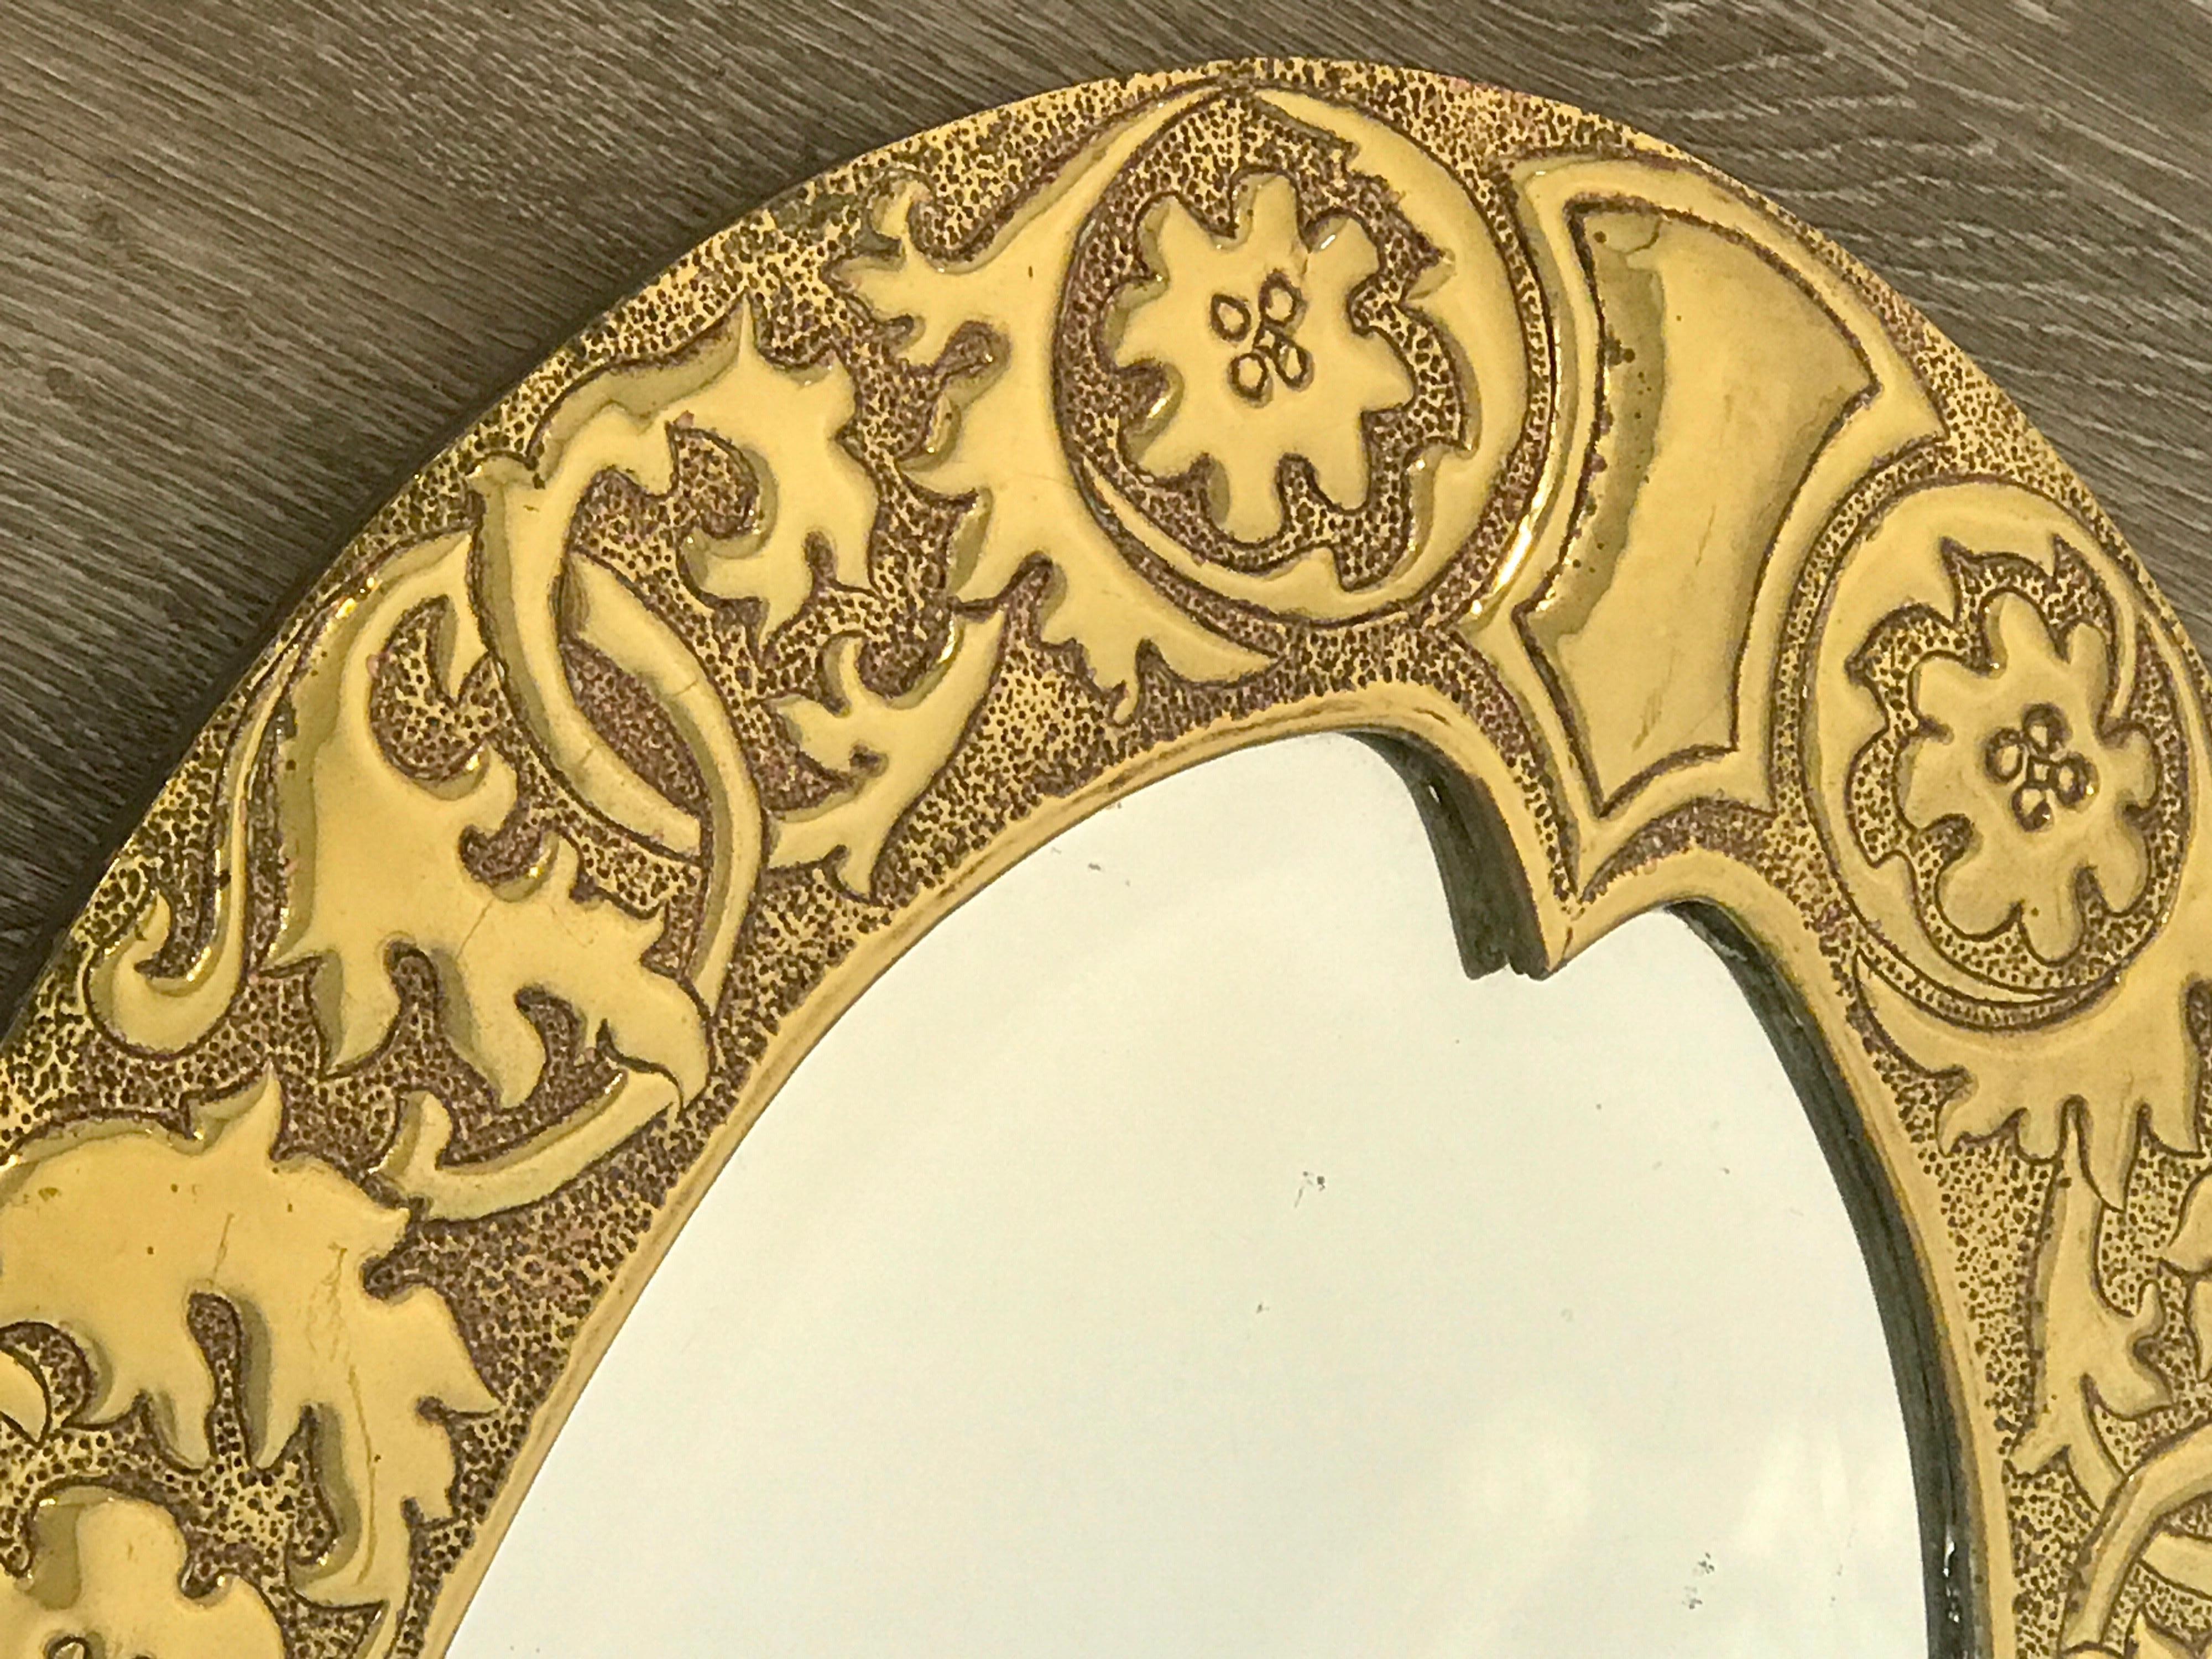 Repoussé Irish Arts & Crafts Oval Brass Mirror, Attributed to the Glasgow School